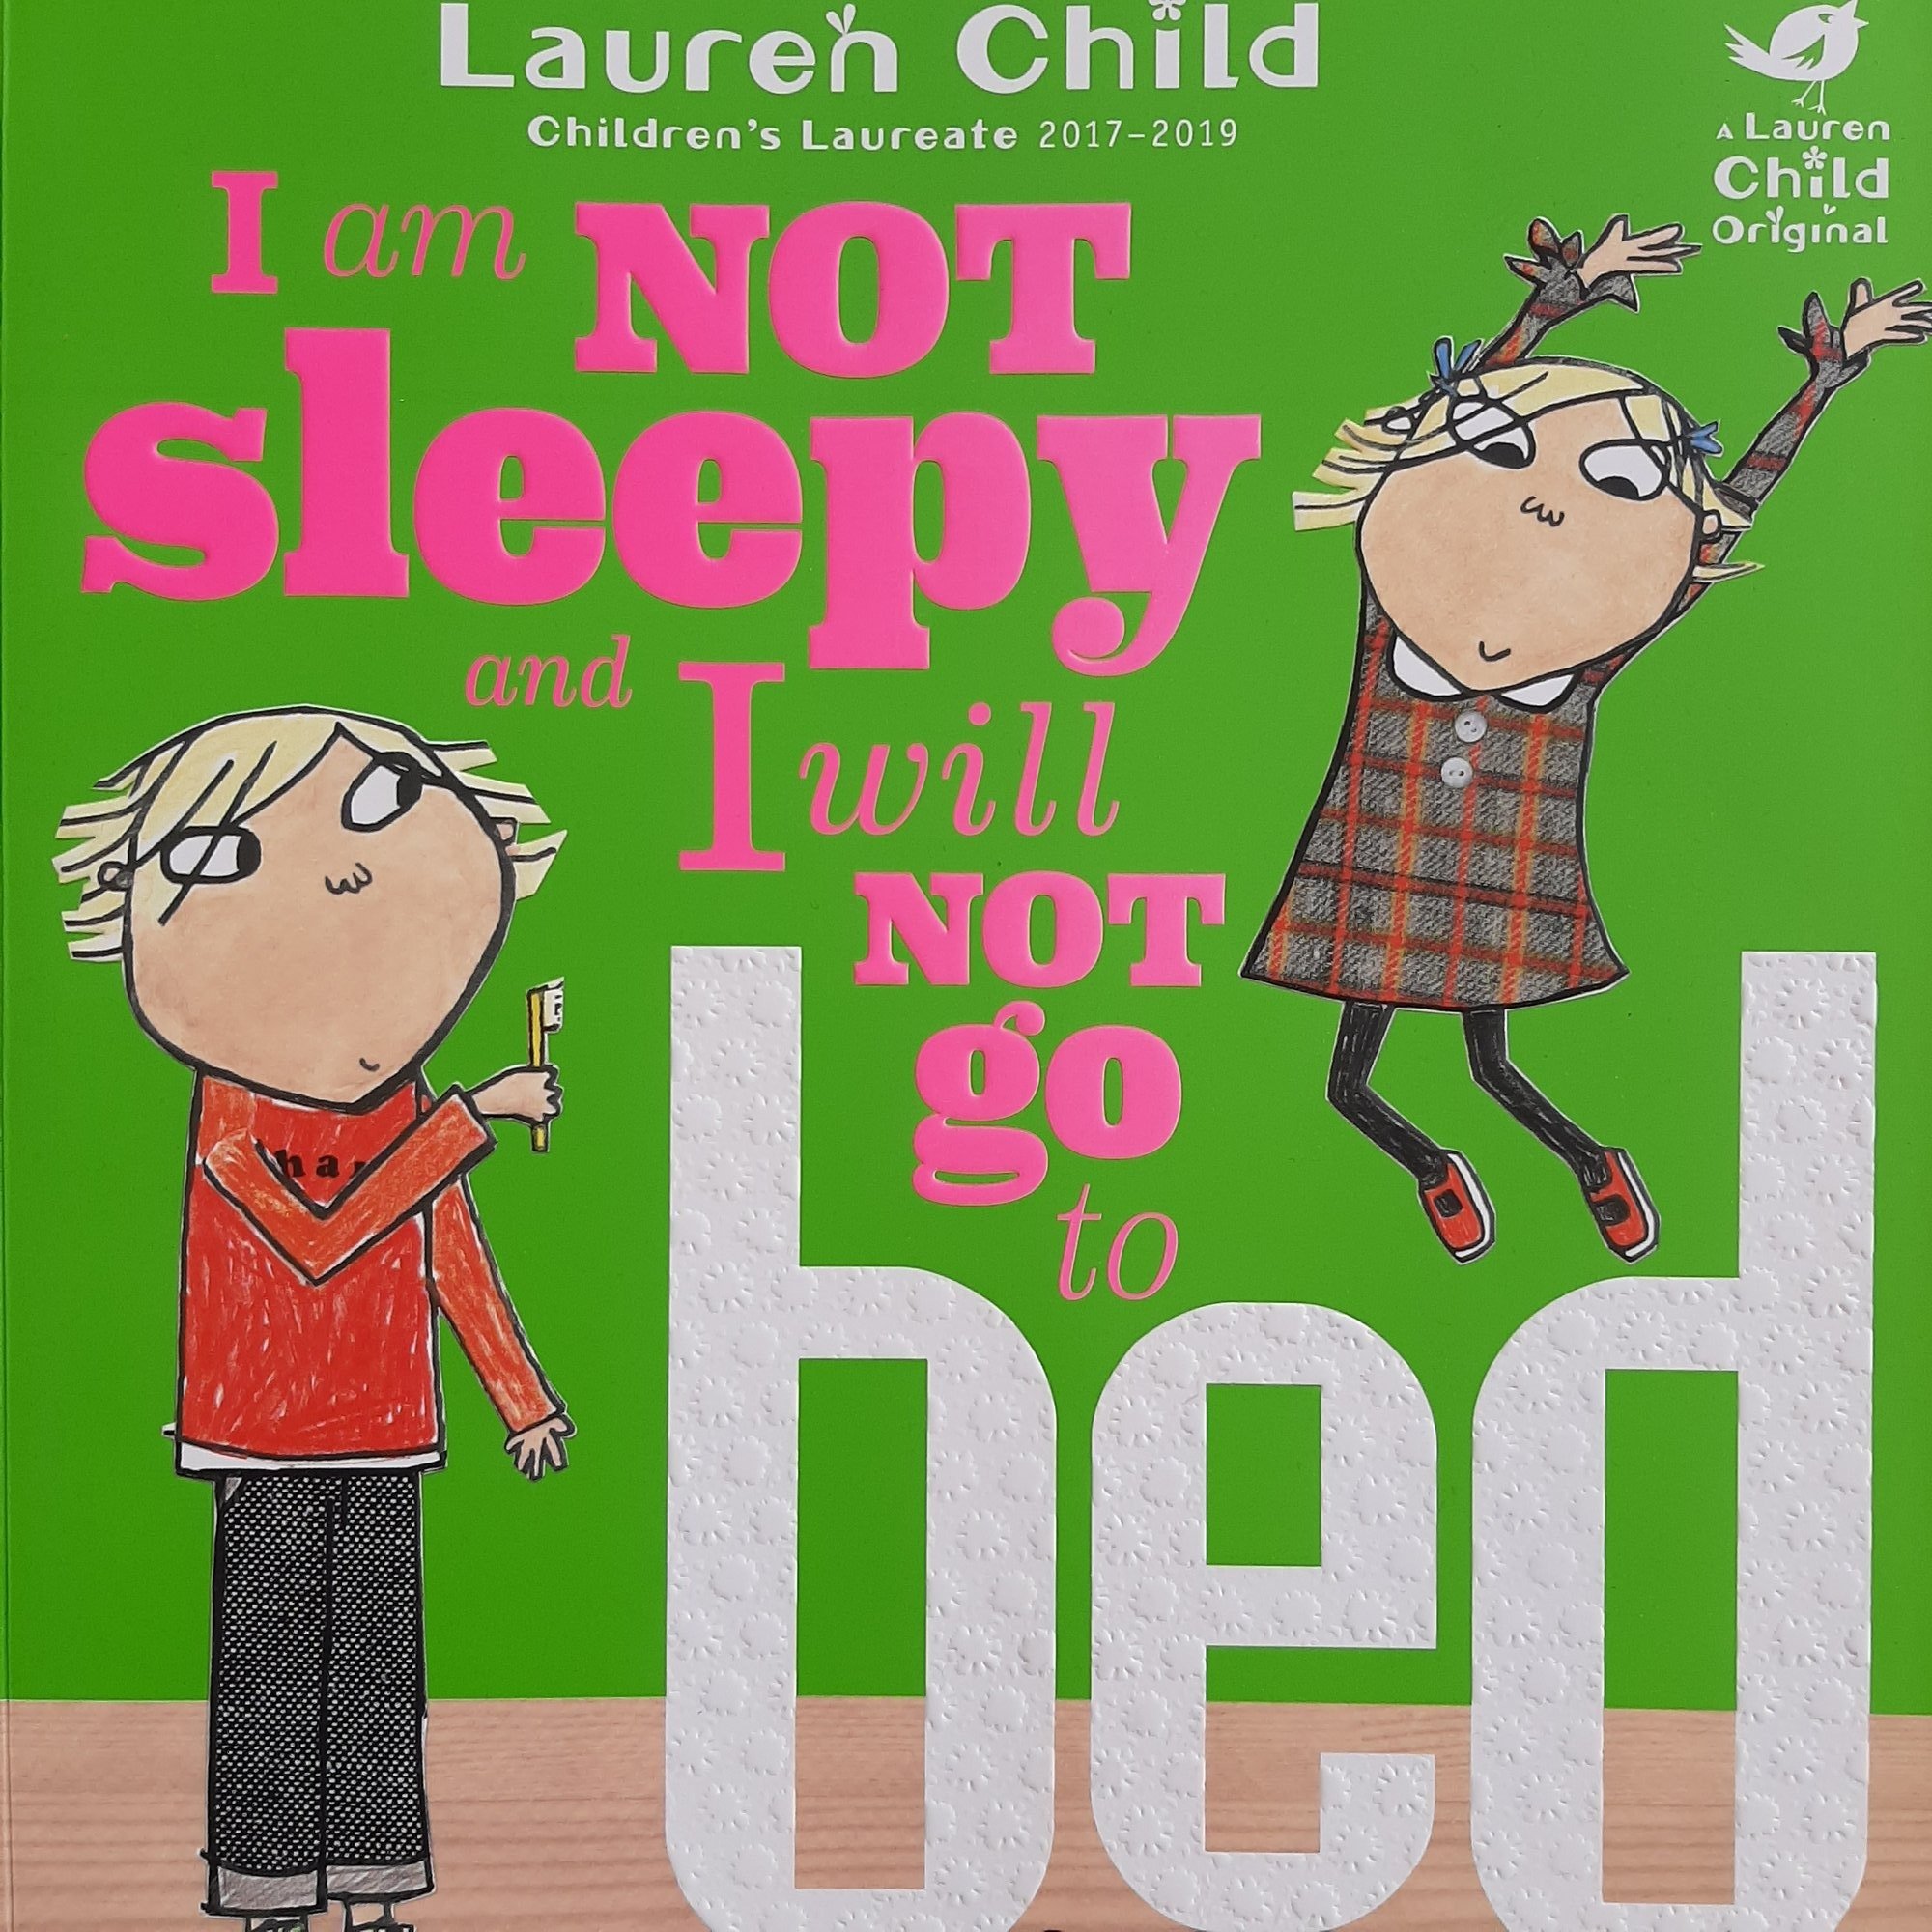 I am not sleepy and I will not go to bed - image of book cover